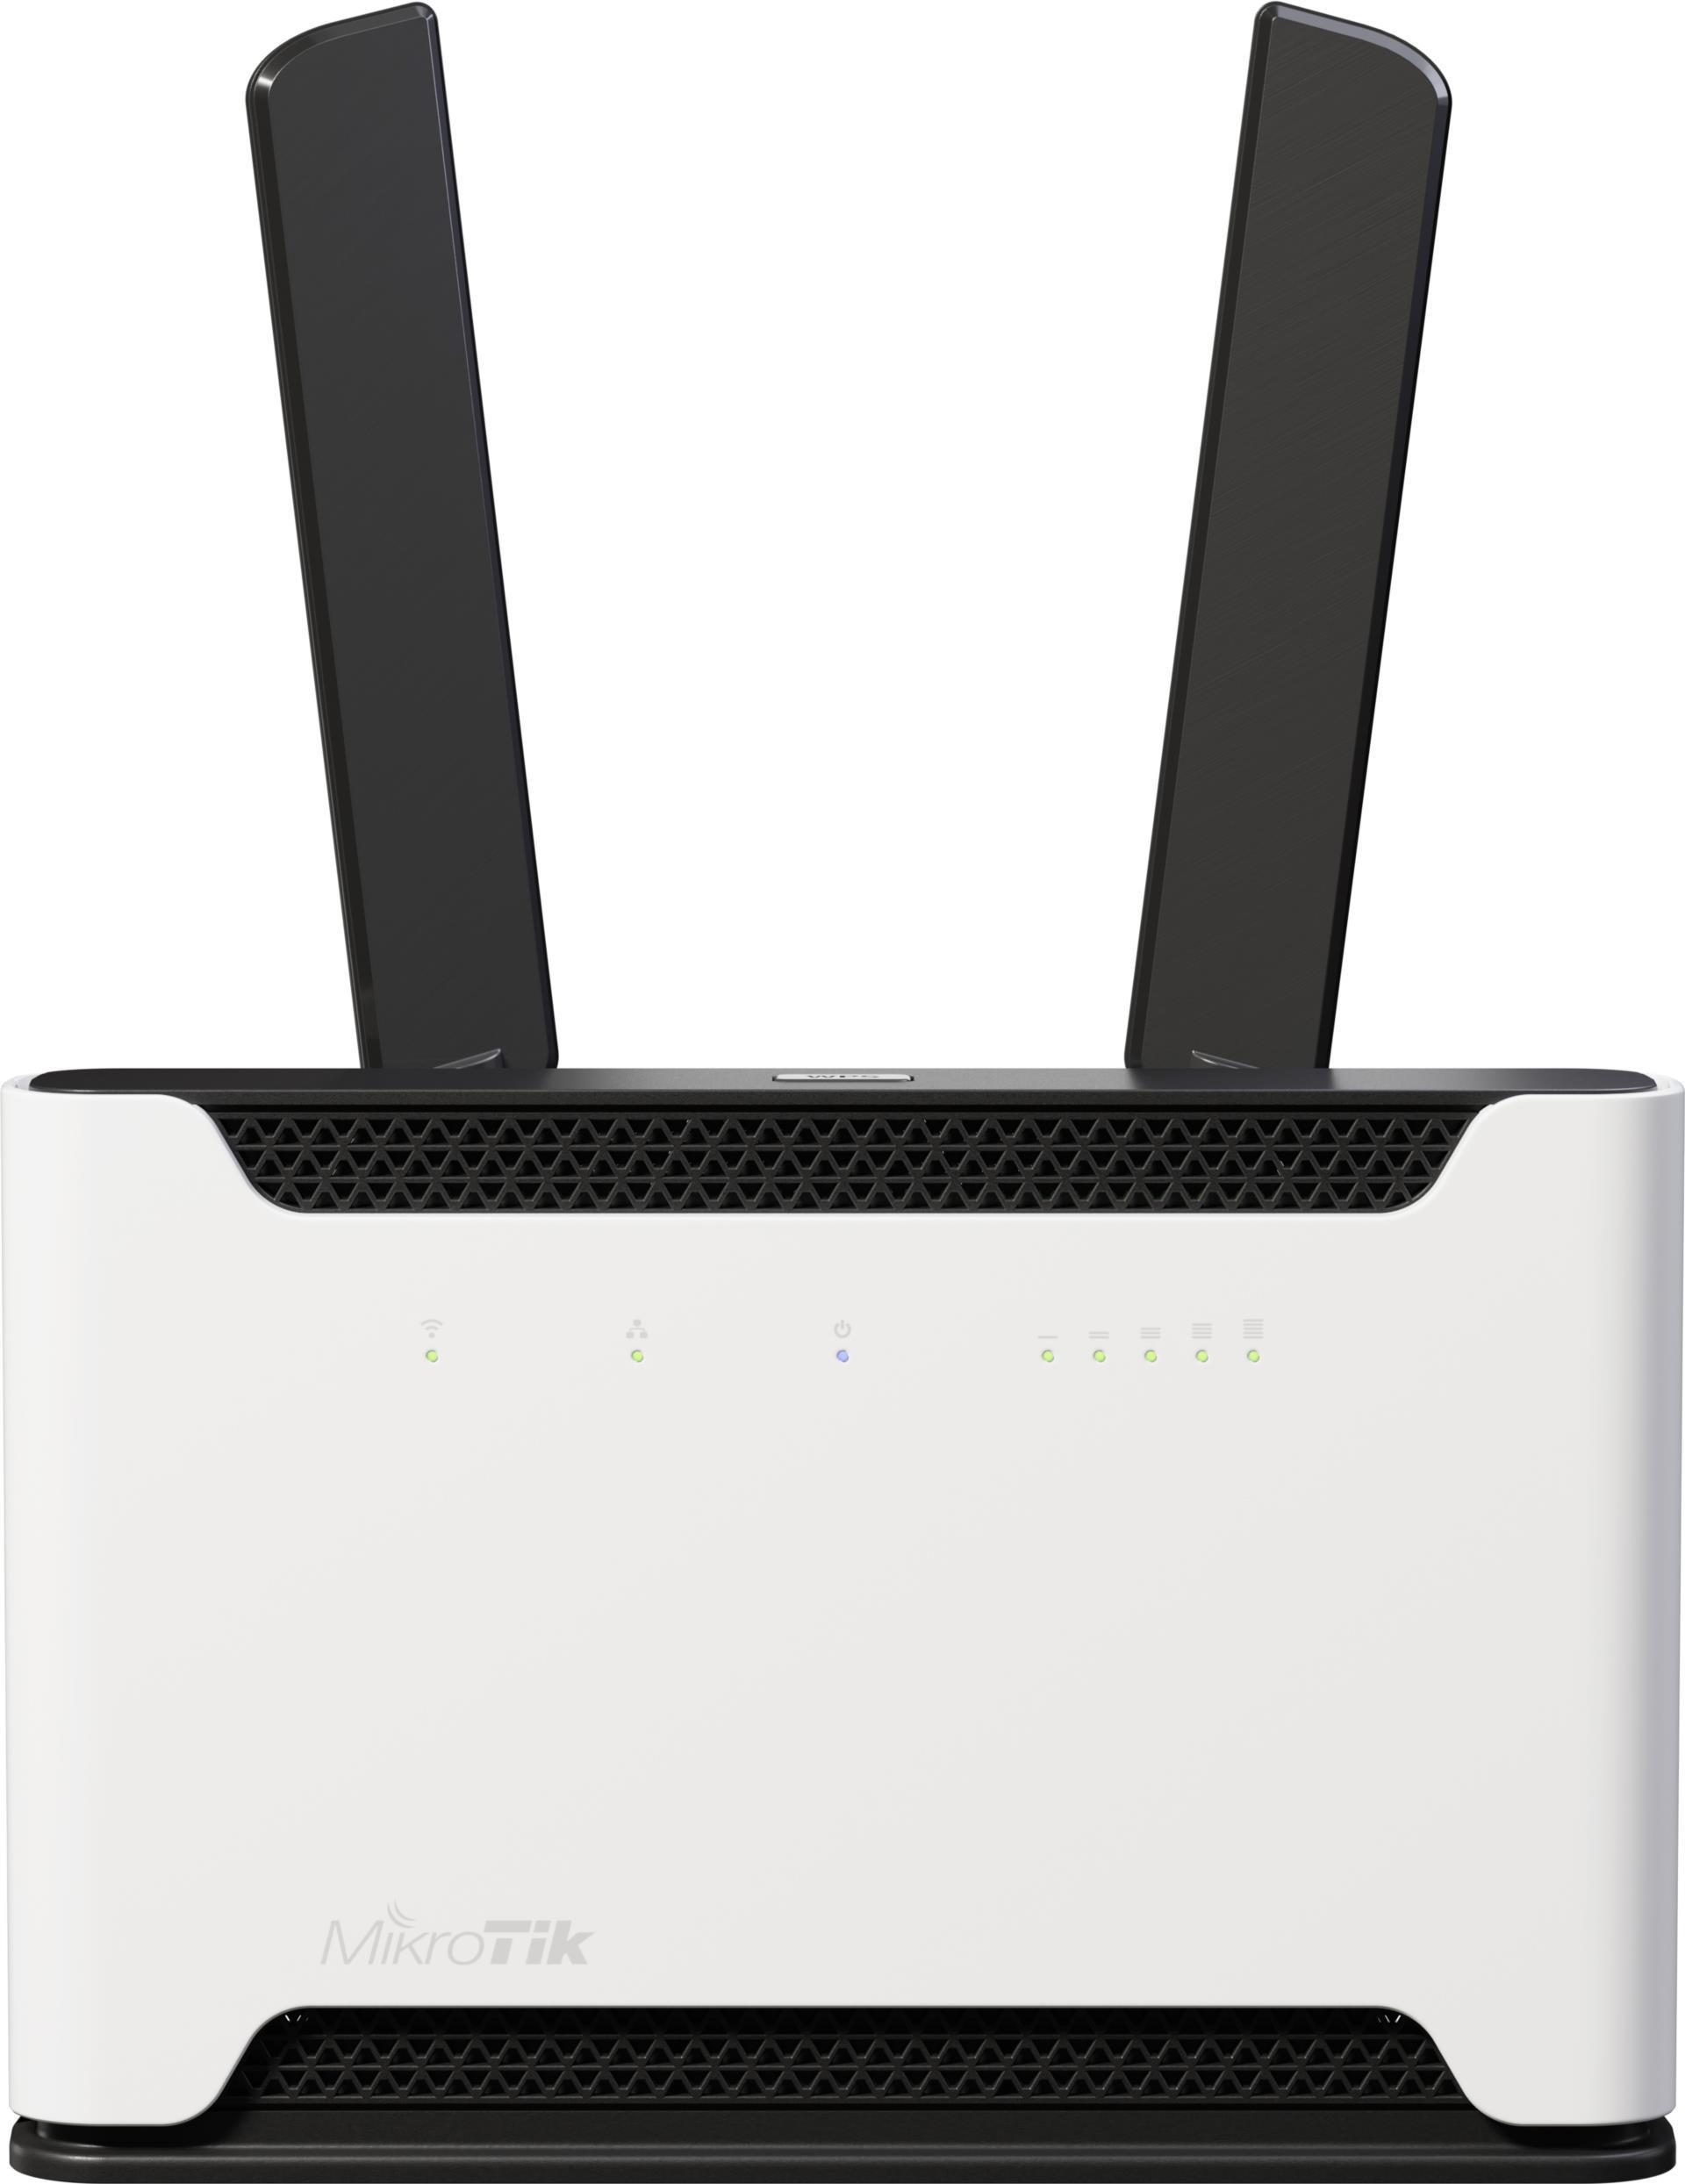 MikroTik Chateau LTE/5G Kit Dual-Band Router, 5x 1GBit LAN, USB, LTE20/5G Support LTE Produkte (CHATEAU 5G-R)